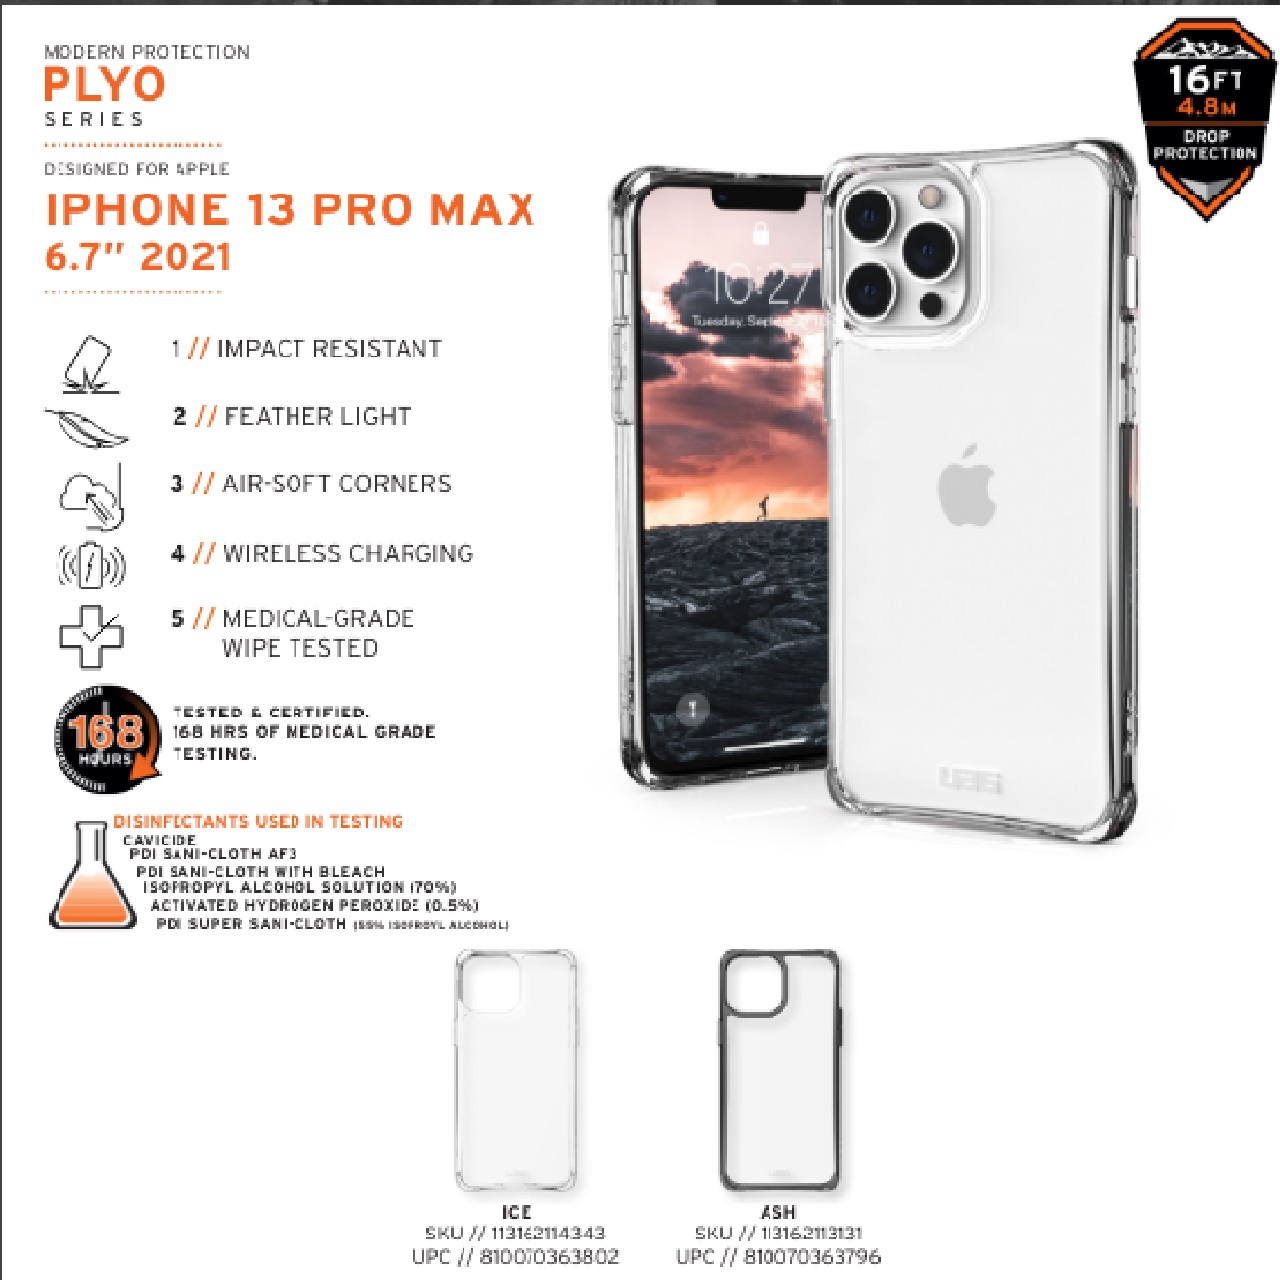 UAG Plyo Apple iPhone 13 Pro Max Case  Ice 113162114343 16ft. Drop Protection 4.8M Raised Screen Surround Armored Shell AirSoft Corners